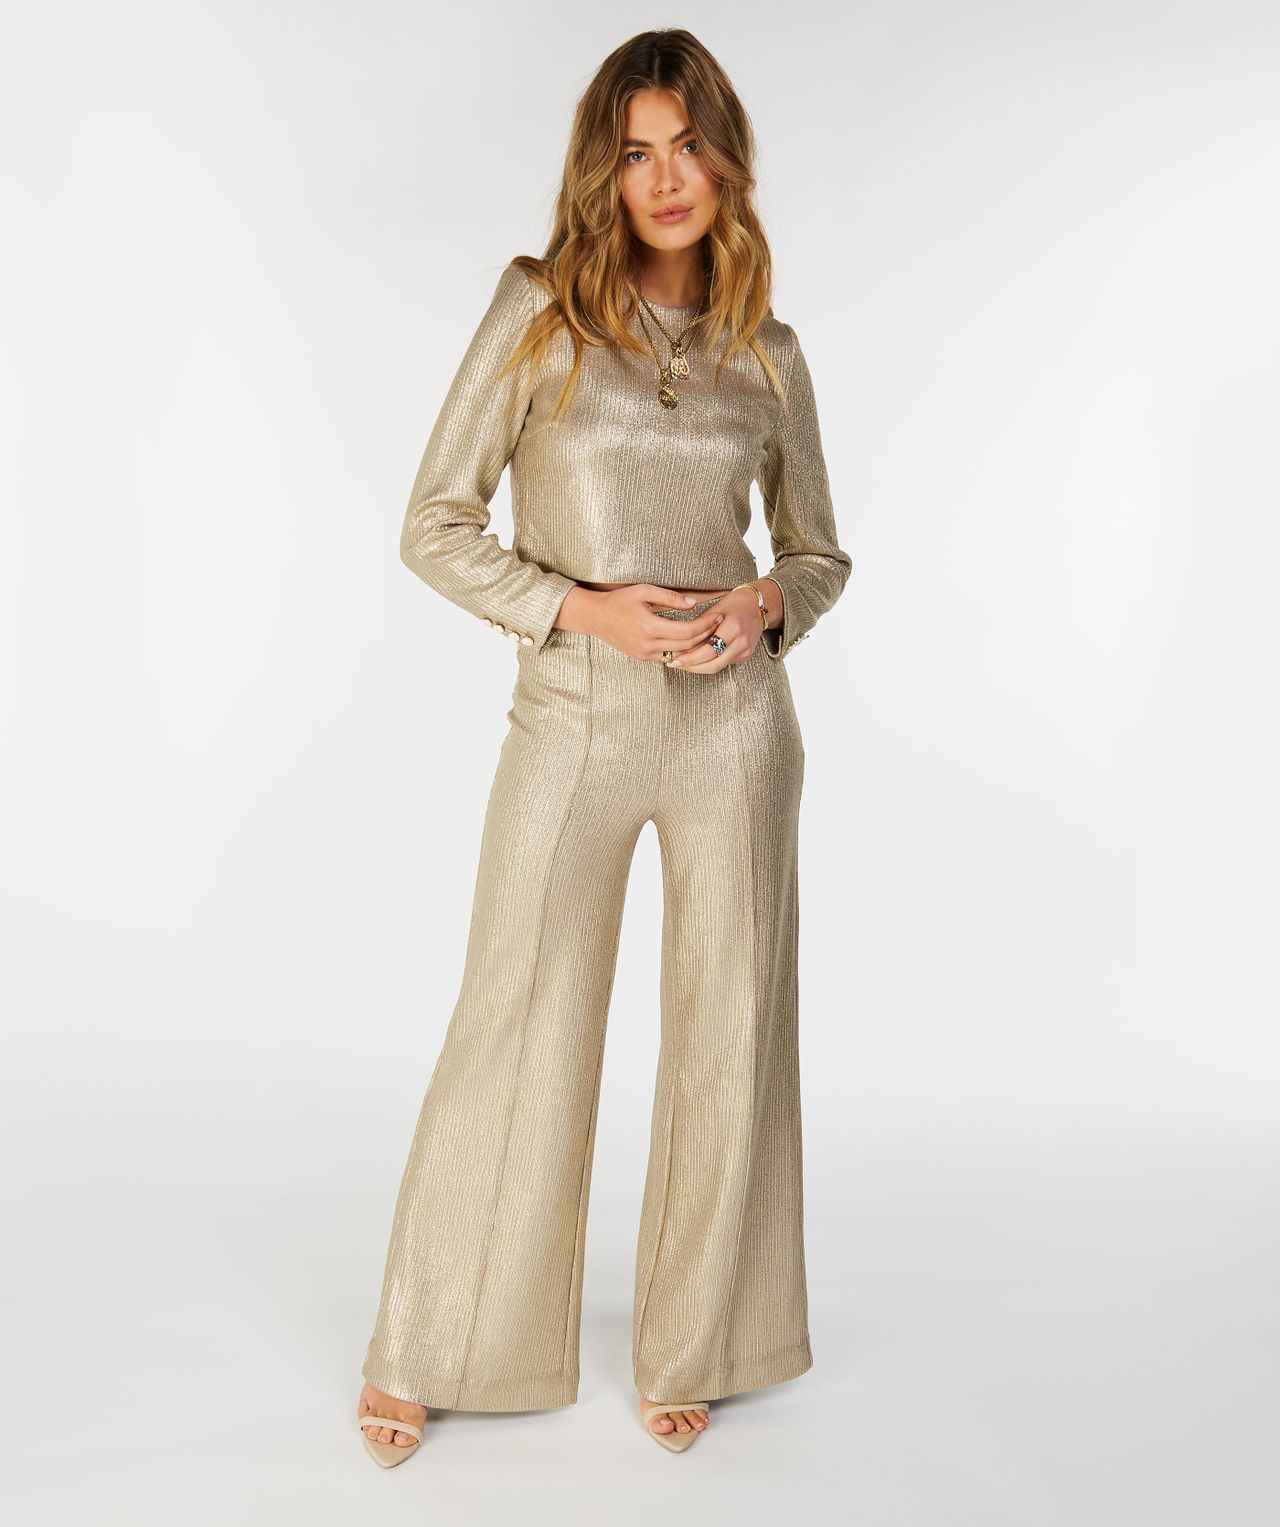 HOLLY Trousers Glitter | Trousers | JOSH V Party 2021 | Official online ...